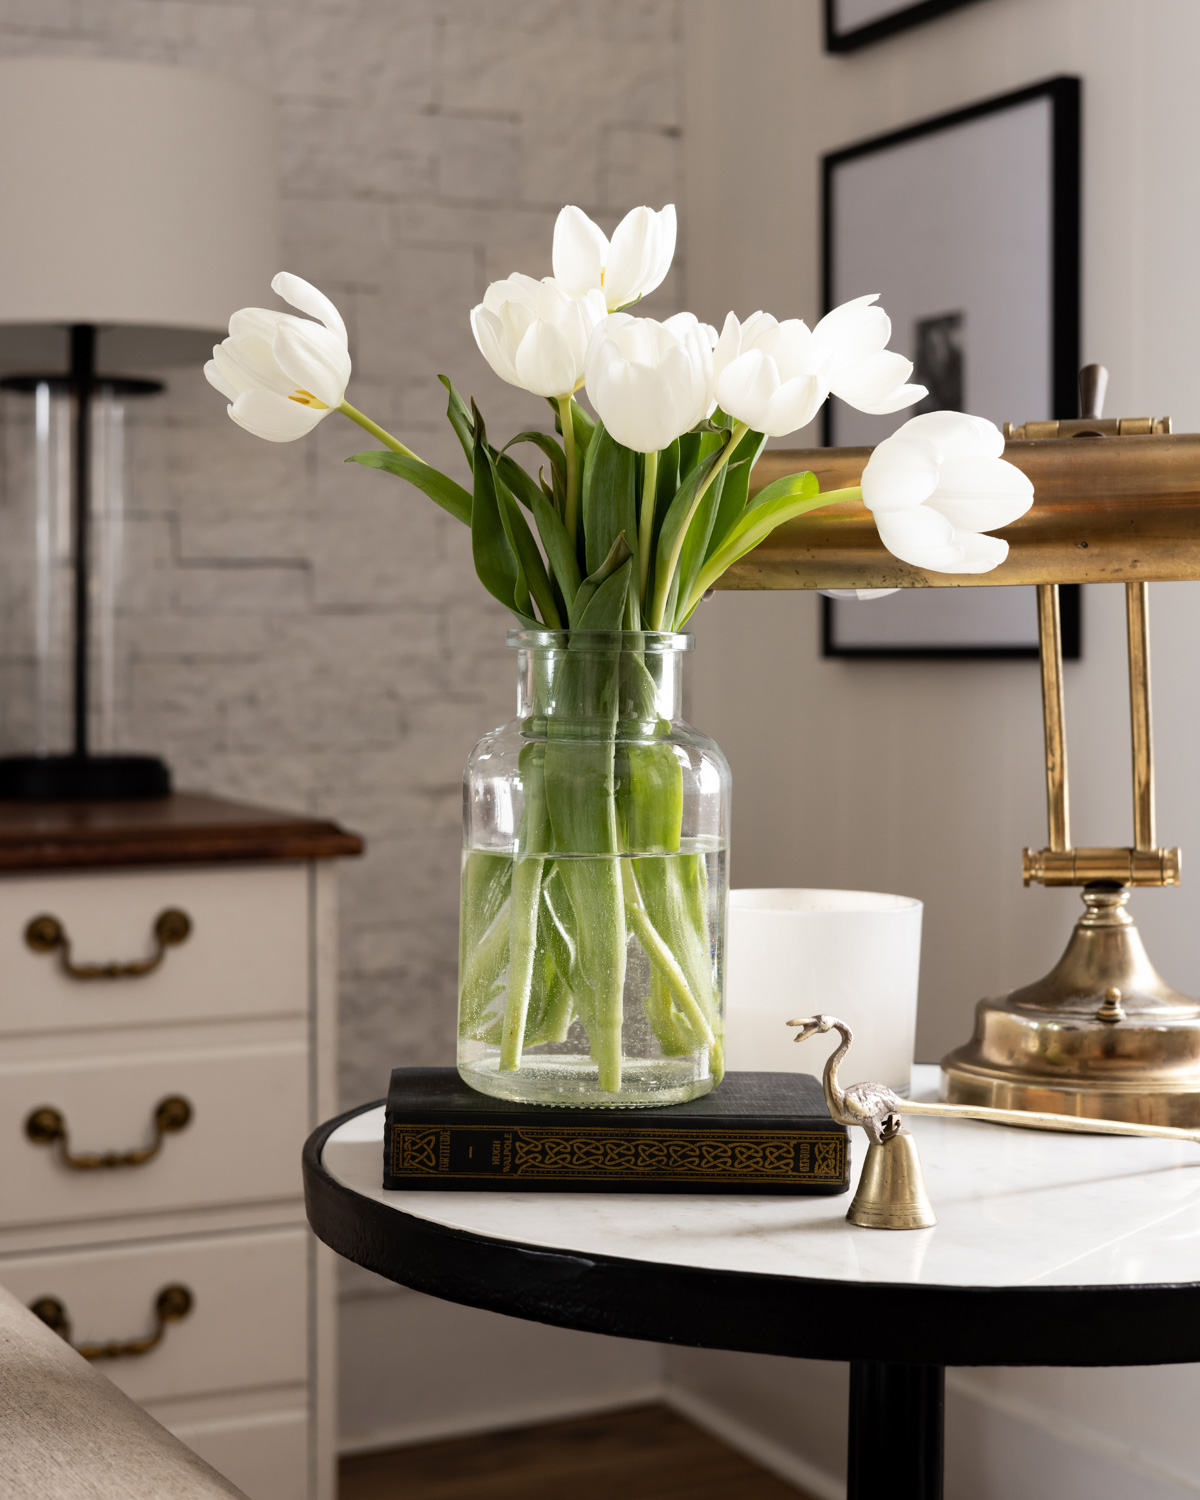 Beautiful white tulips in a glass vase.